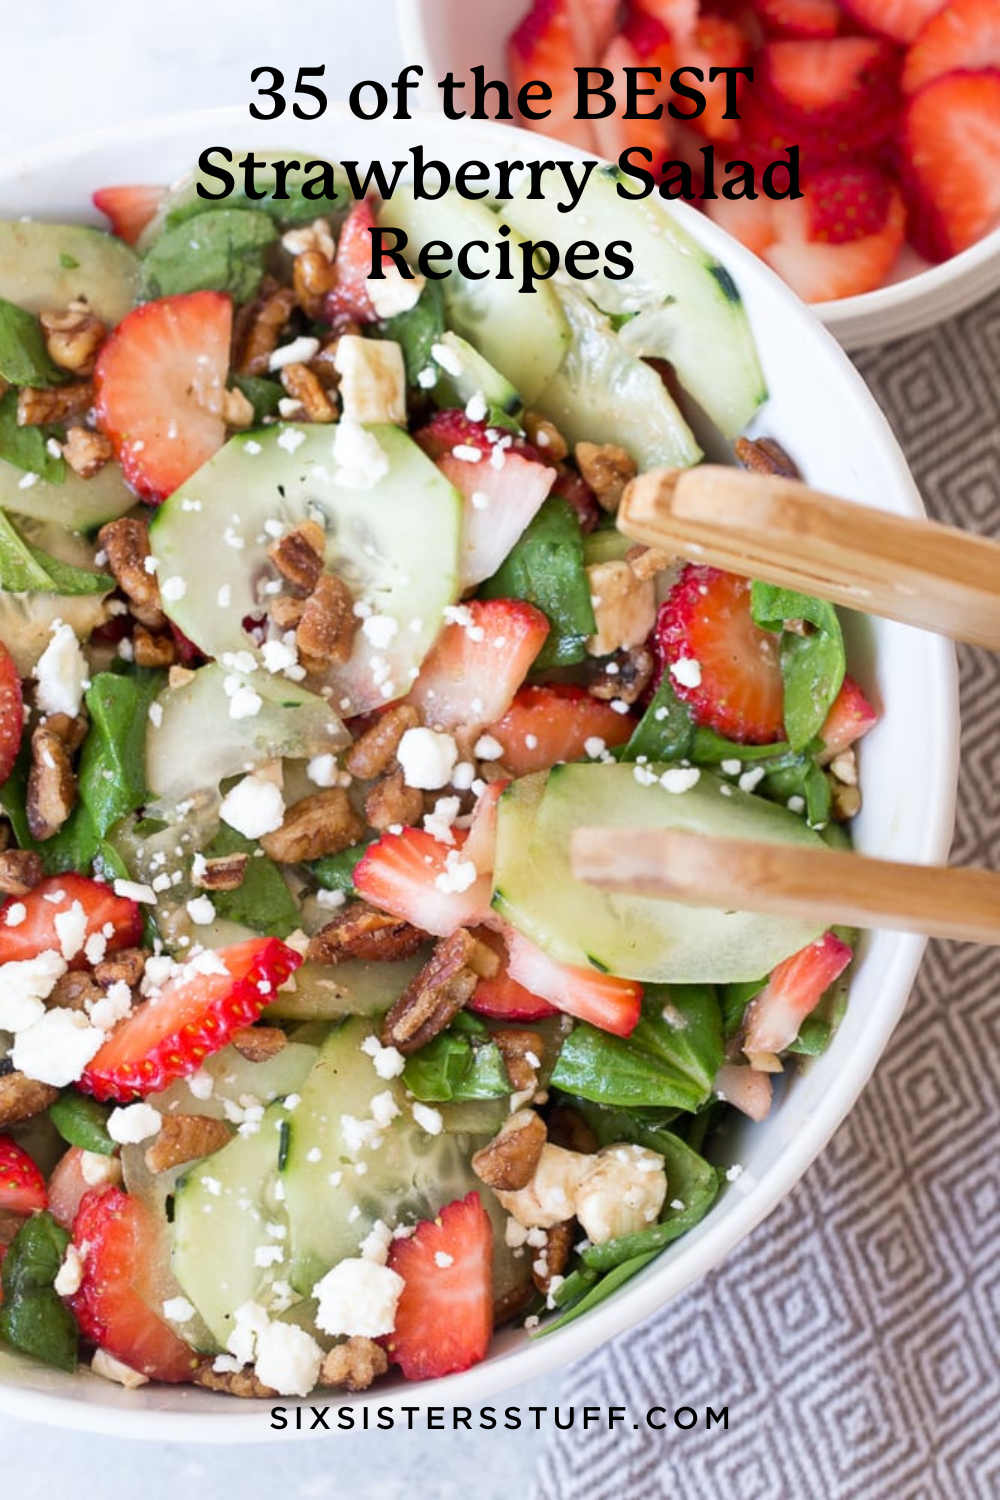 35 of the BEST Strawberry Salad Recipes